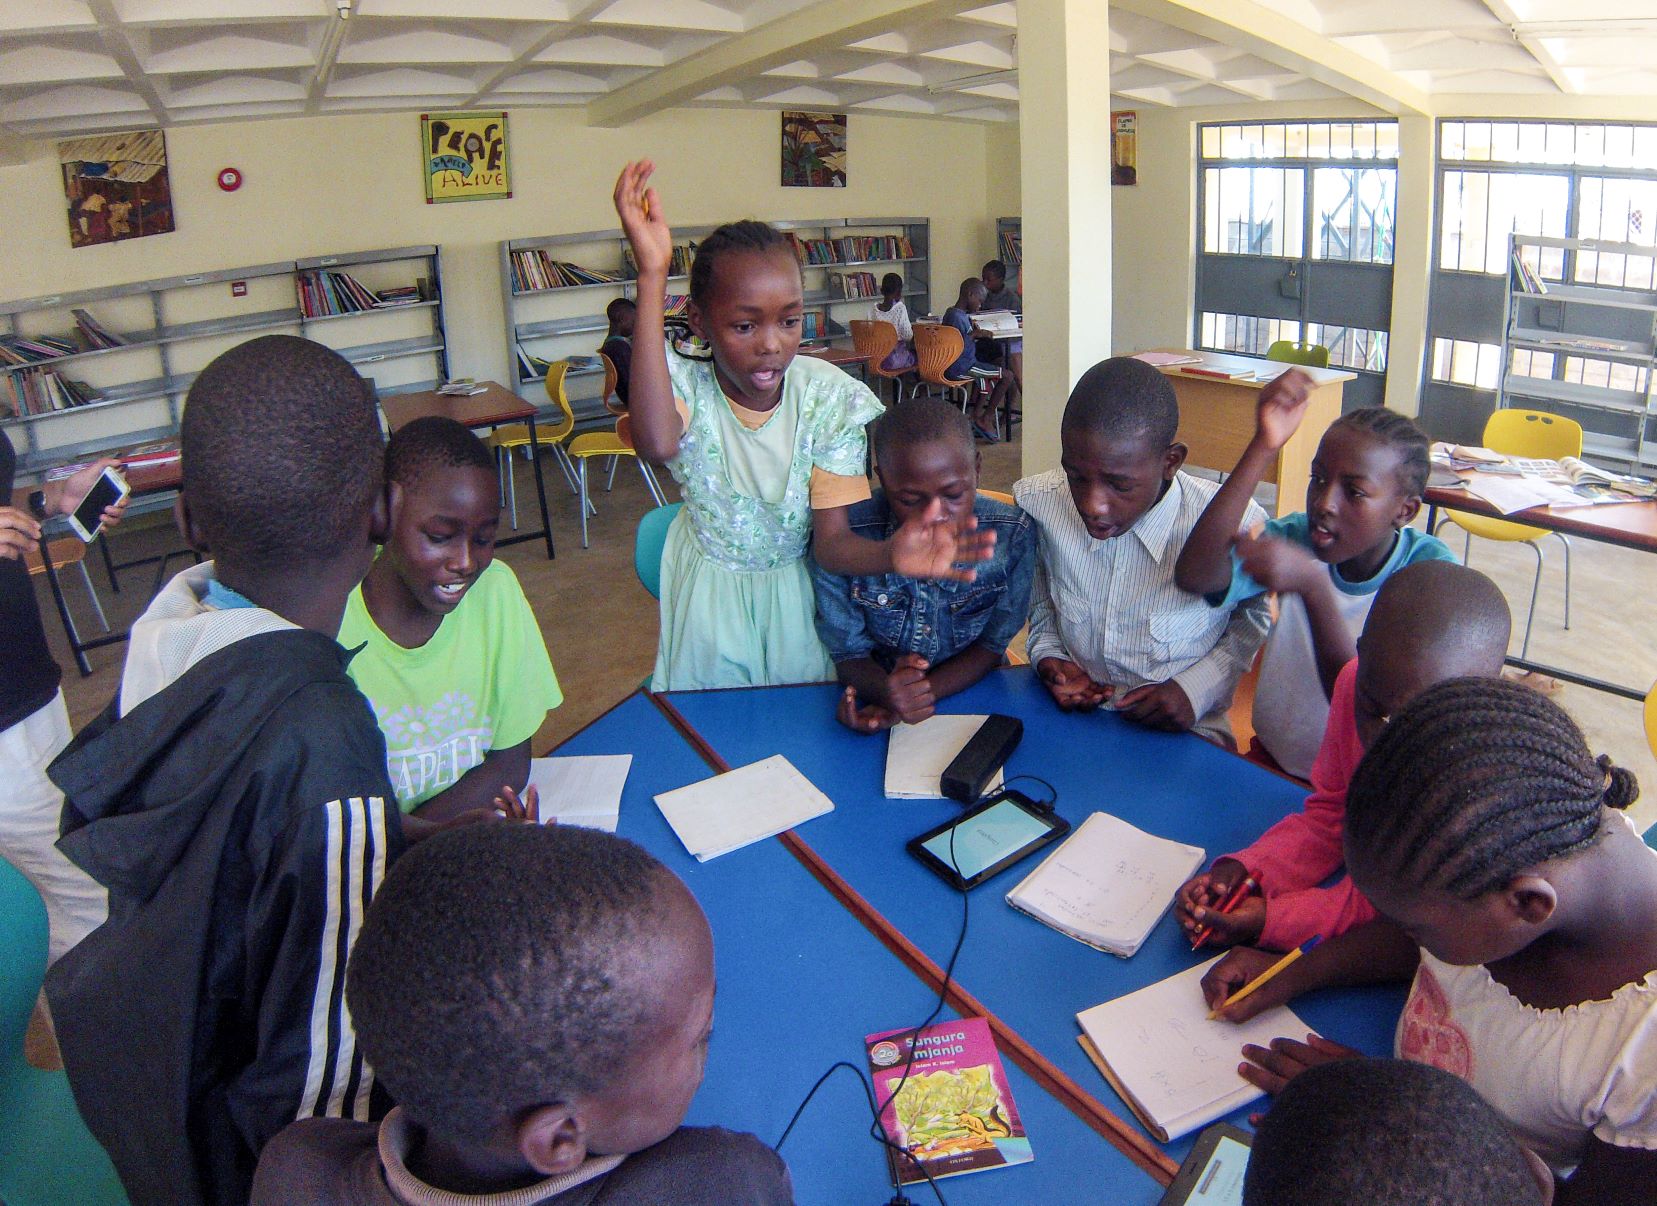 “Children participating in educational activity in the library ” by EIFL is licensed under CC BY 4.0